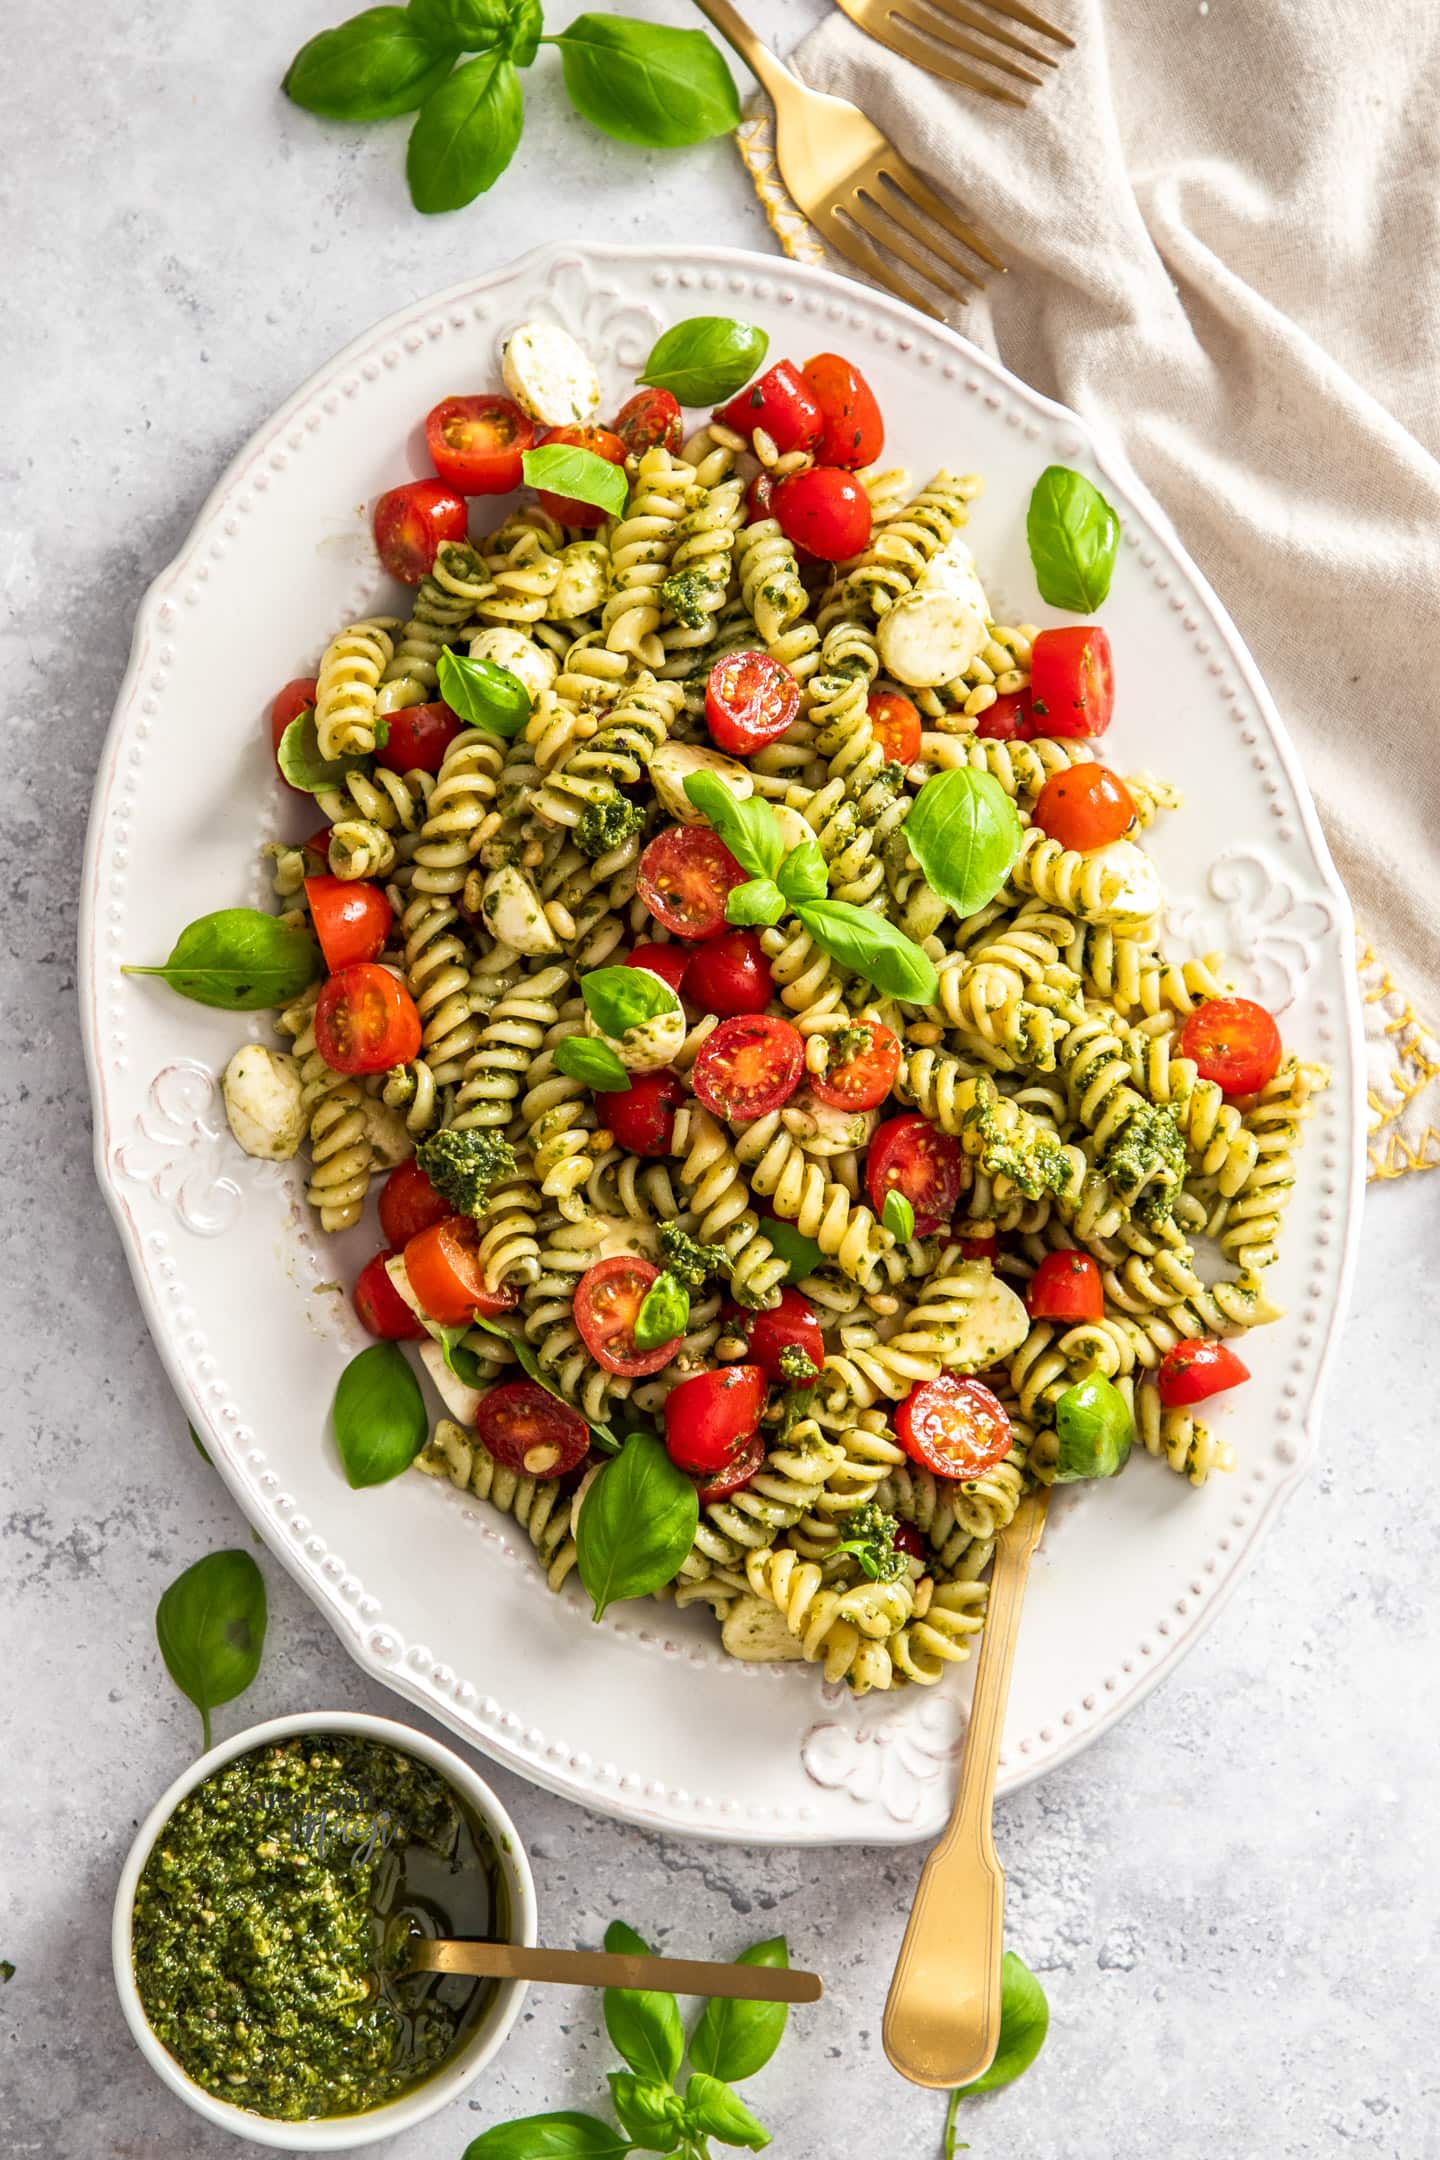 Top down view of a plate of pesto caprese pasta salad.